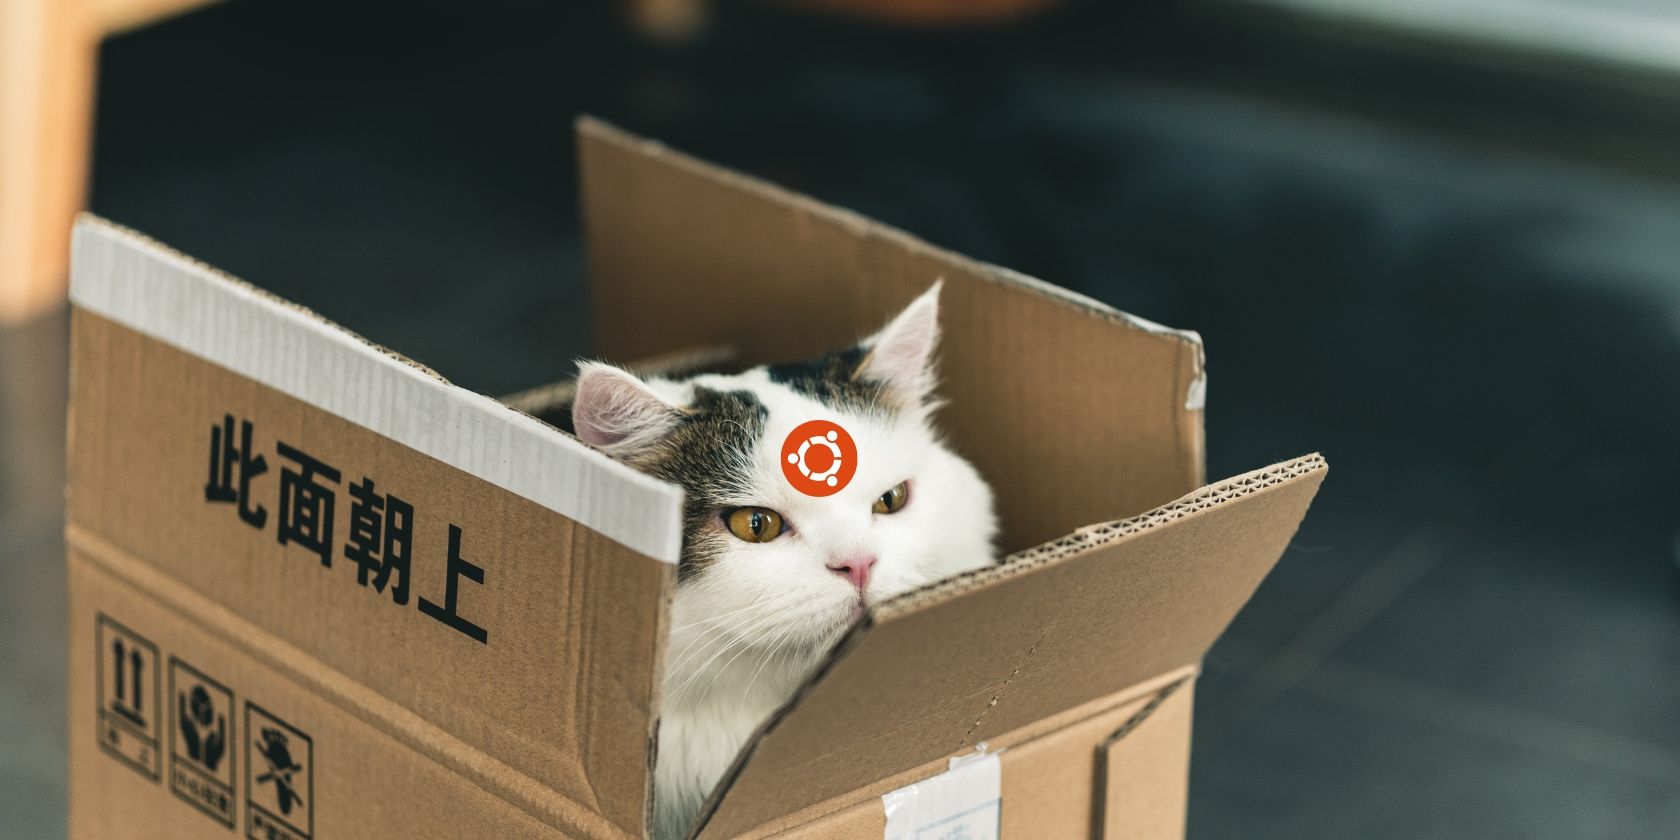 cat in a package with ubuntu logo on its forehead